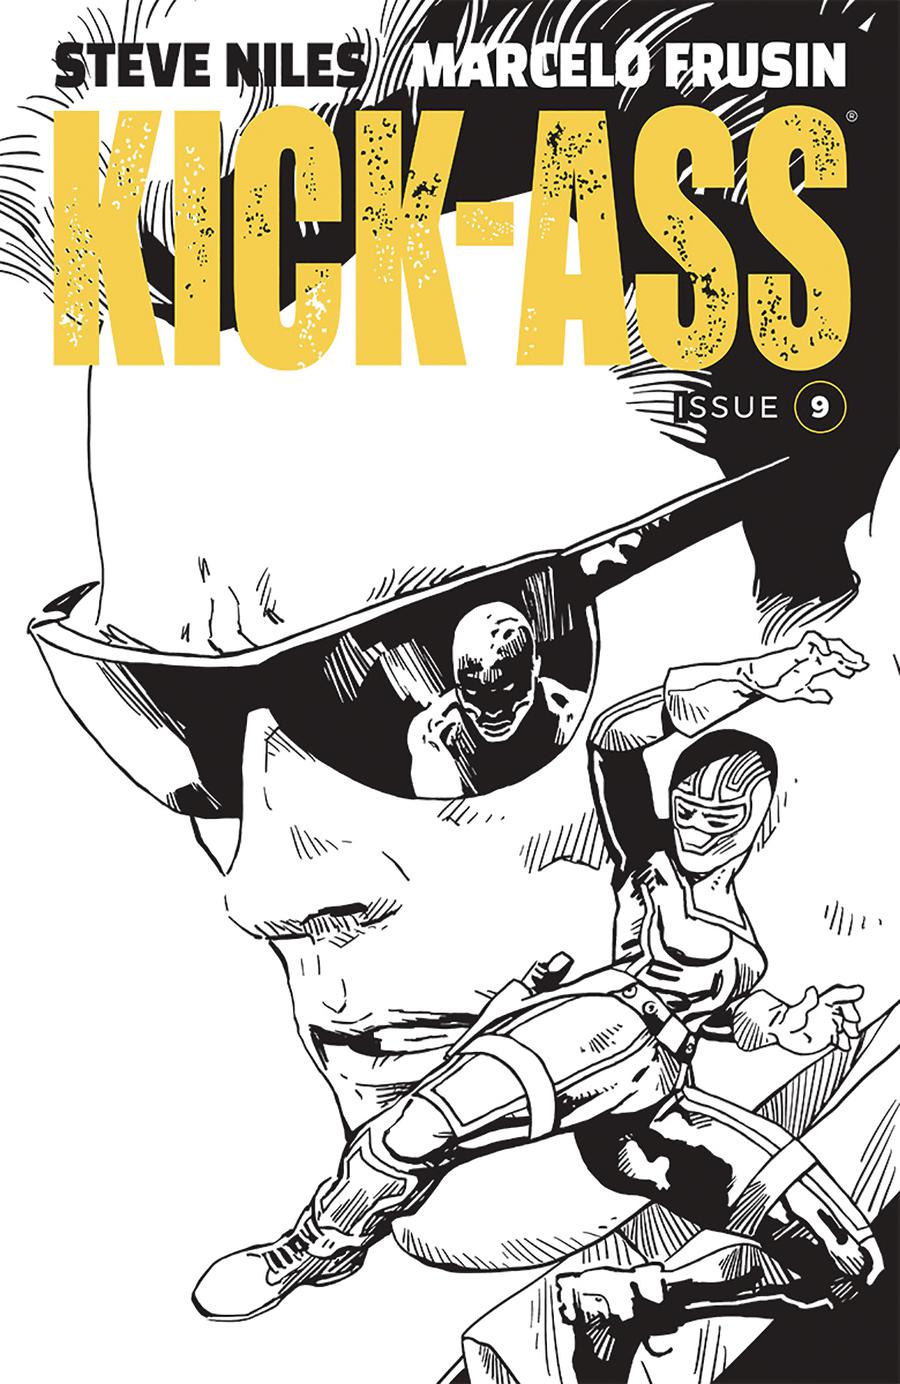 Kick-Ass Vol 4 #9 Cover B Variant Marcelo Frusin Sketch Cover